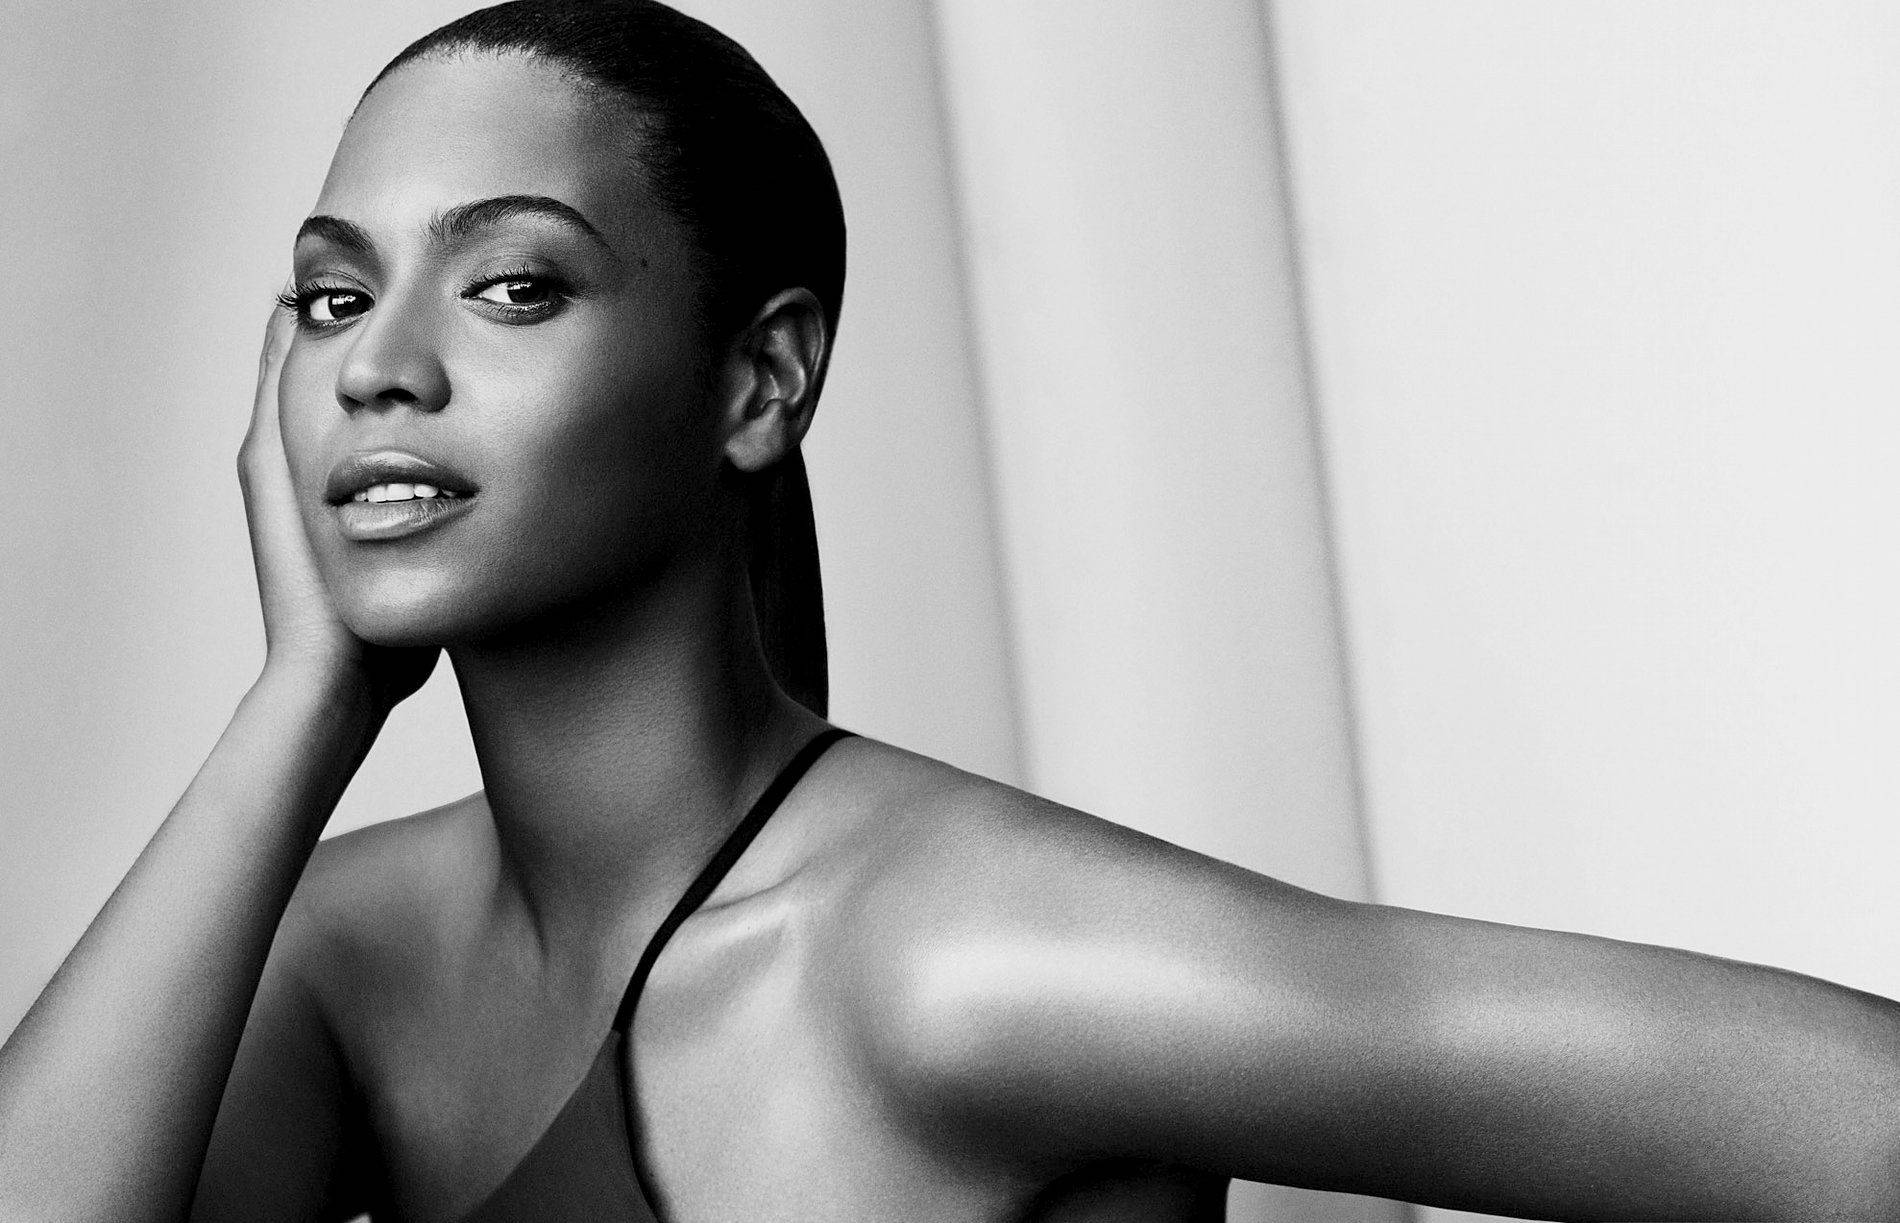 Queen Beyonce Slaying In A Black And White Photo-shoot